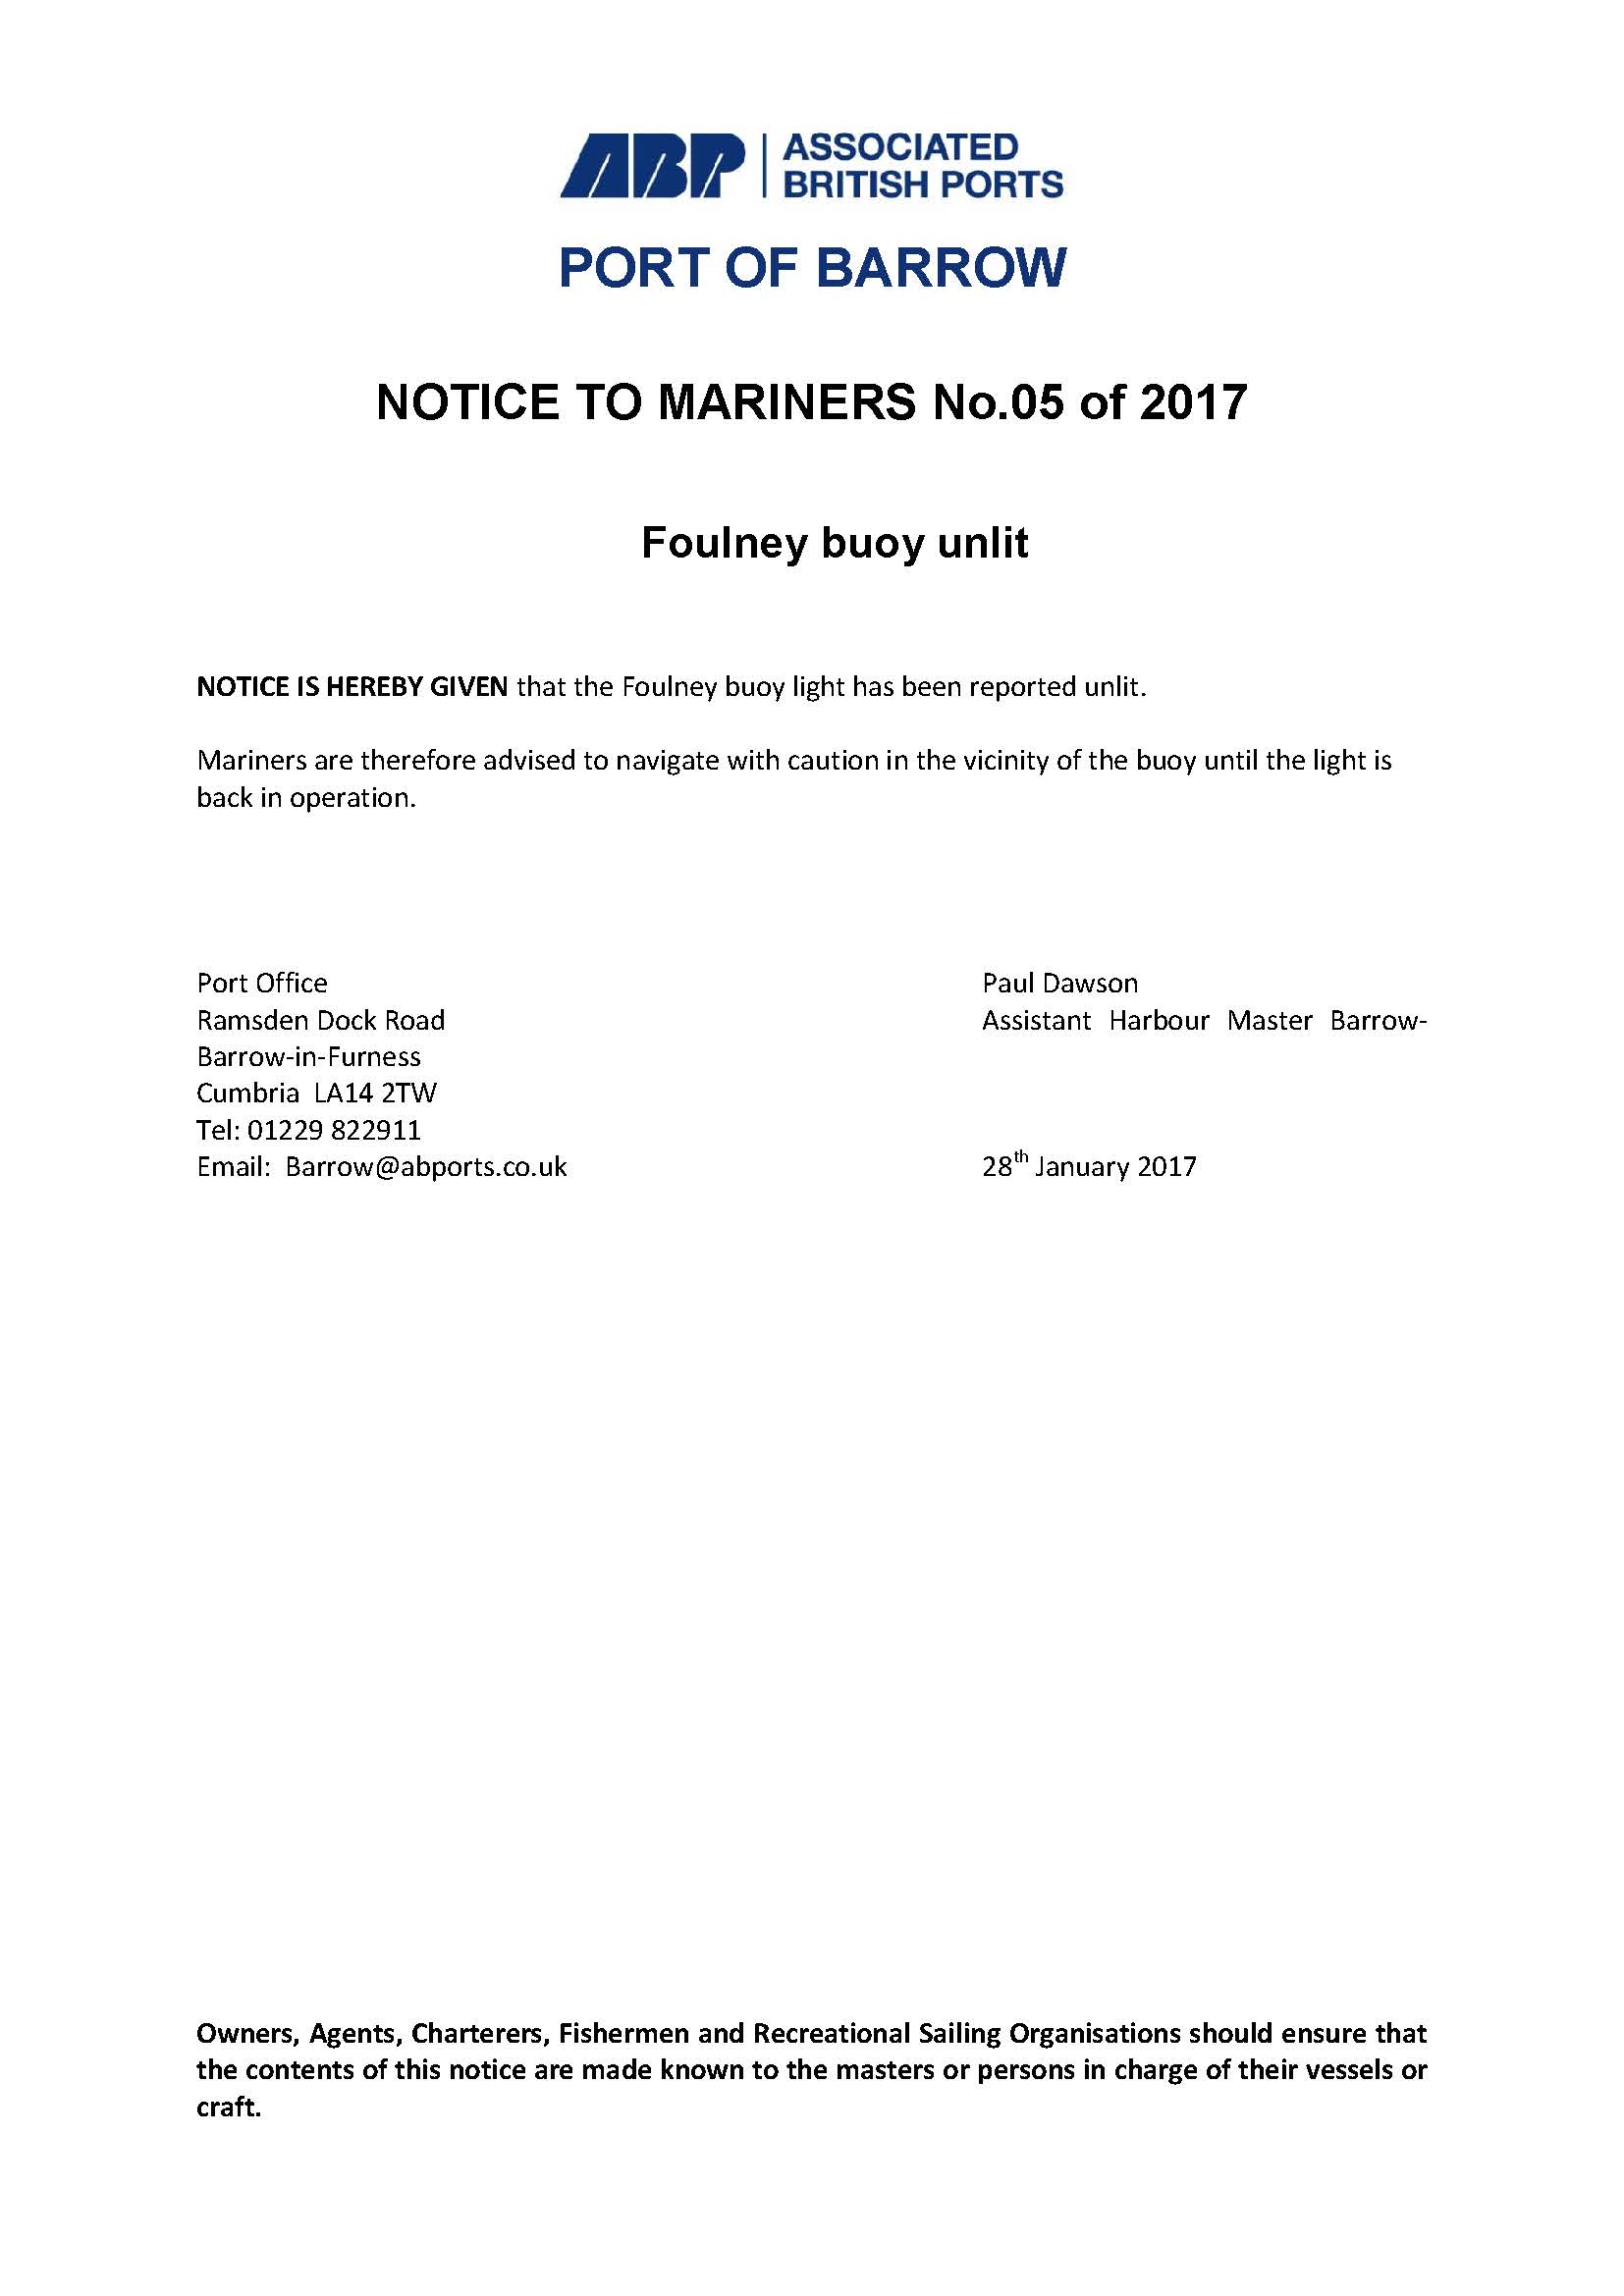 Notice to Mariners 5